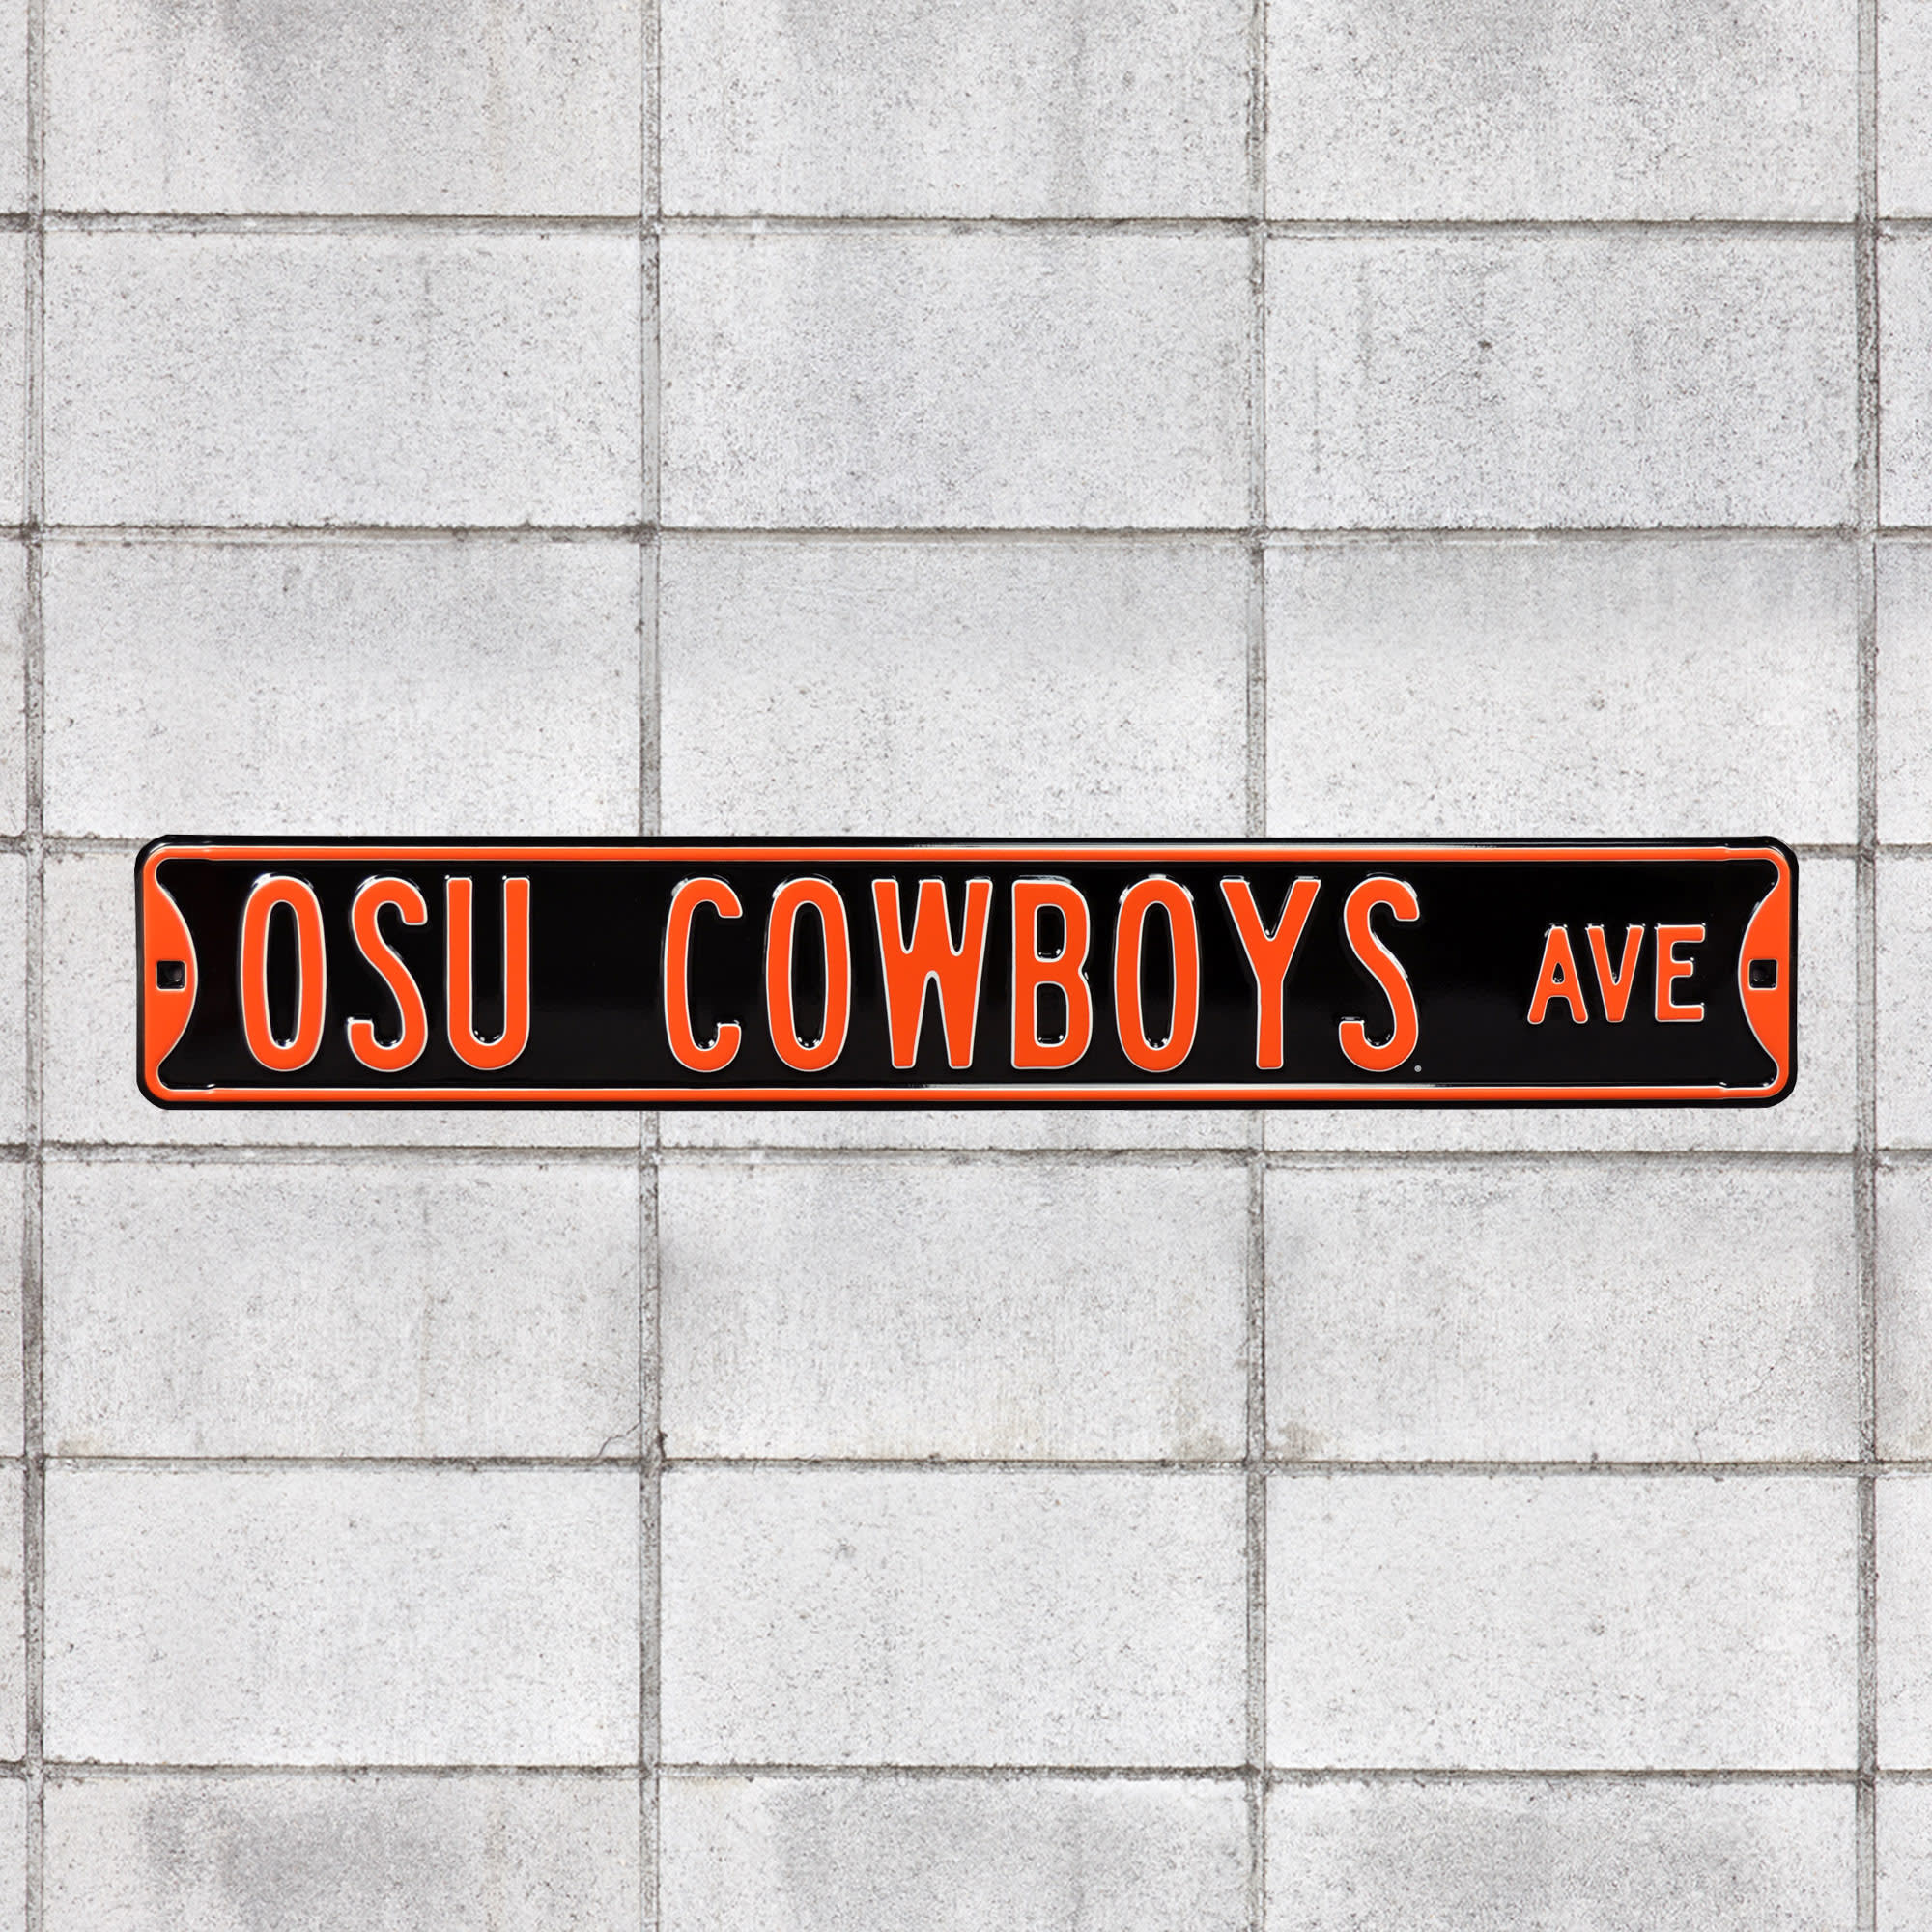 Oklahoma State Cowboys: Oklahoma State Cowboys Avenue - Officially Licensed Metal Street Sign 36.0"W x 6.0"H by Fathead | 100% S